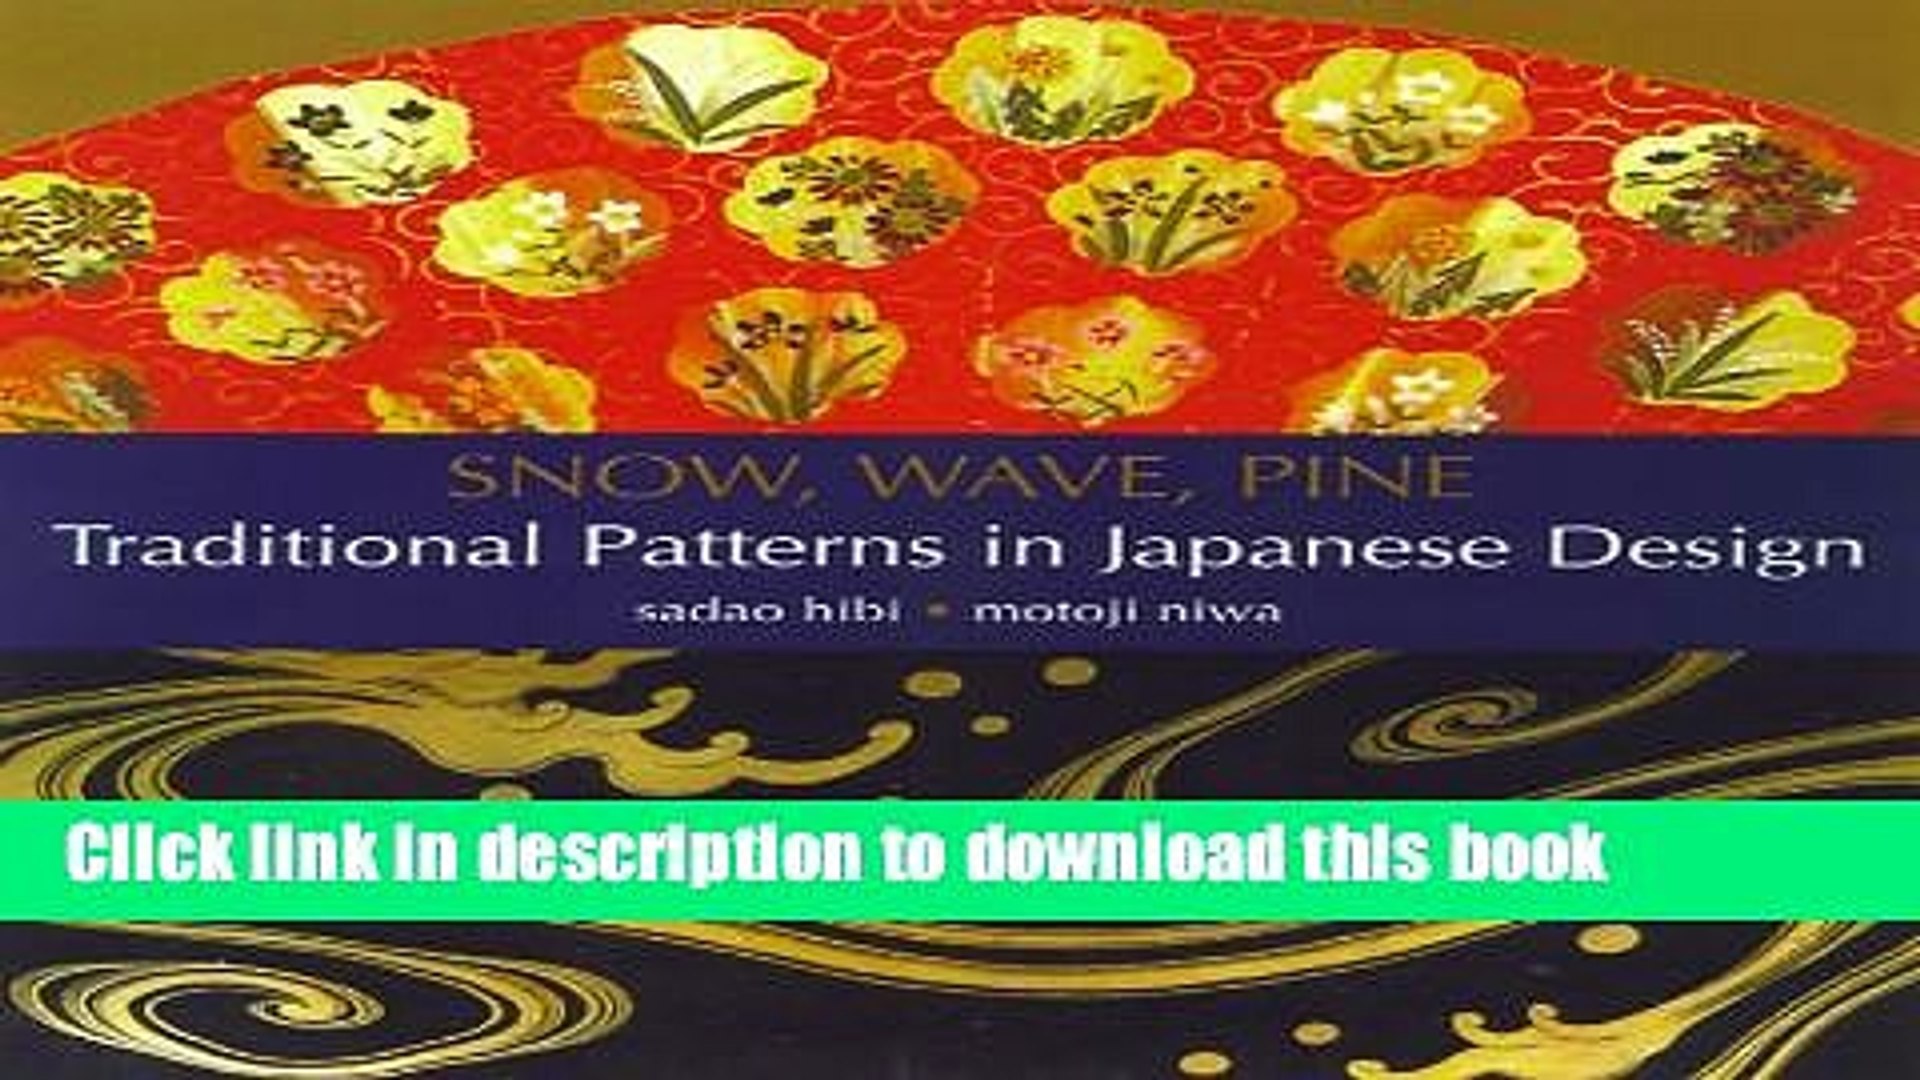 Read Book Snow, Wave, Pine: Traditional Patterns in Japanese Design ebook textbooks